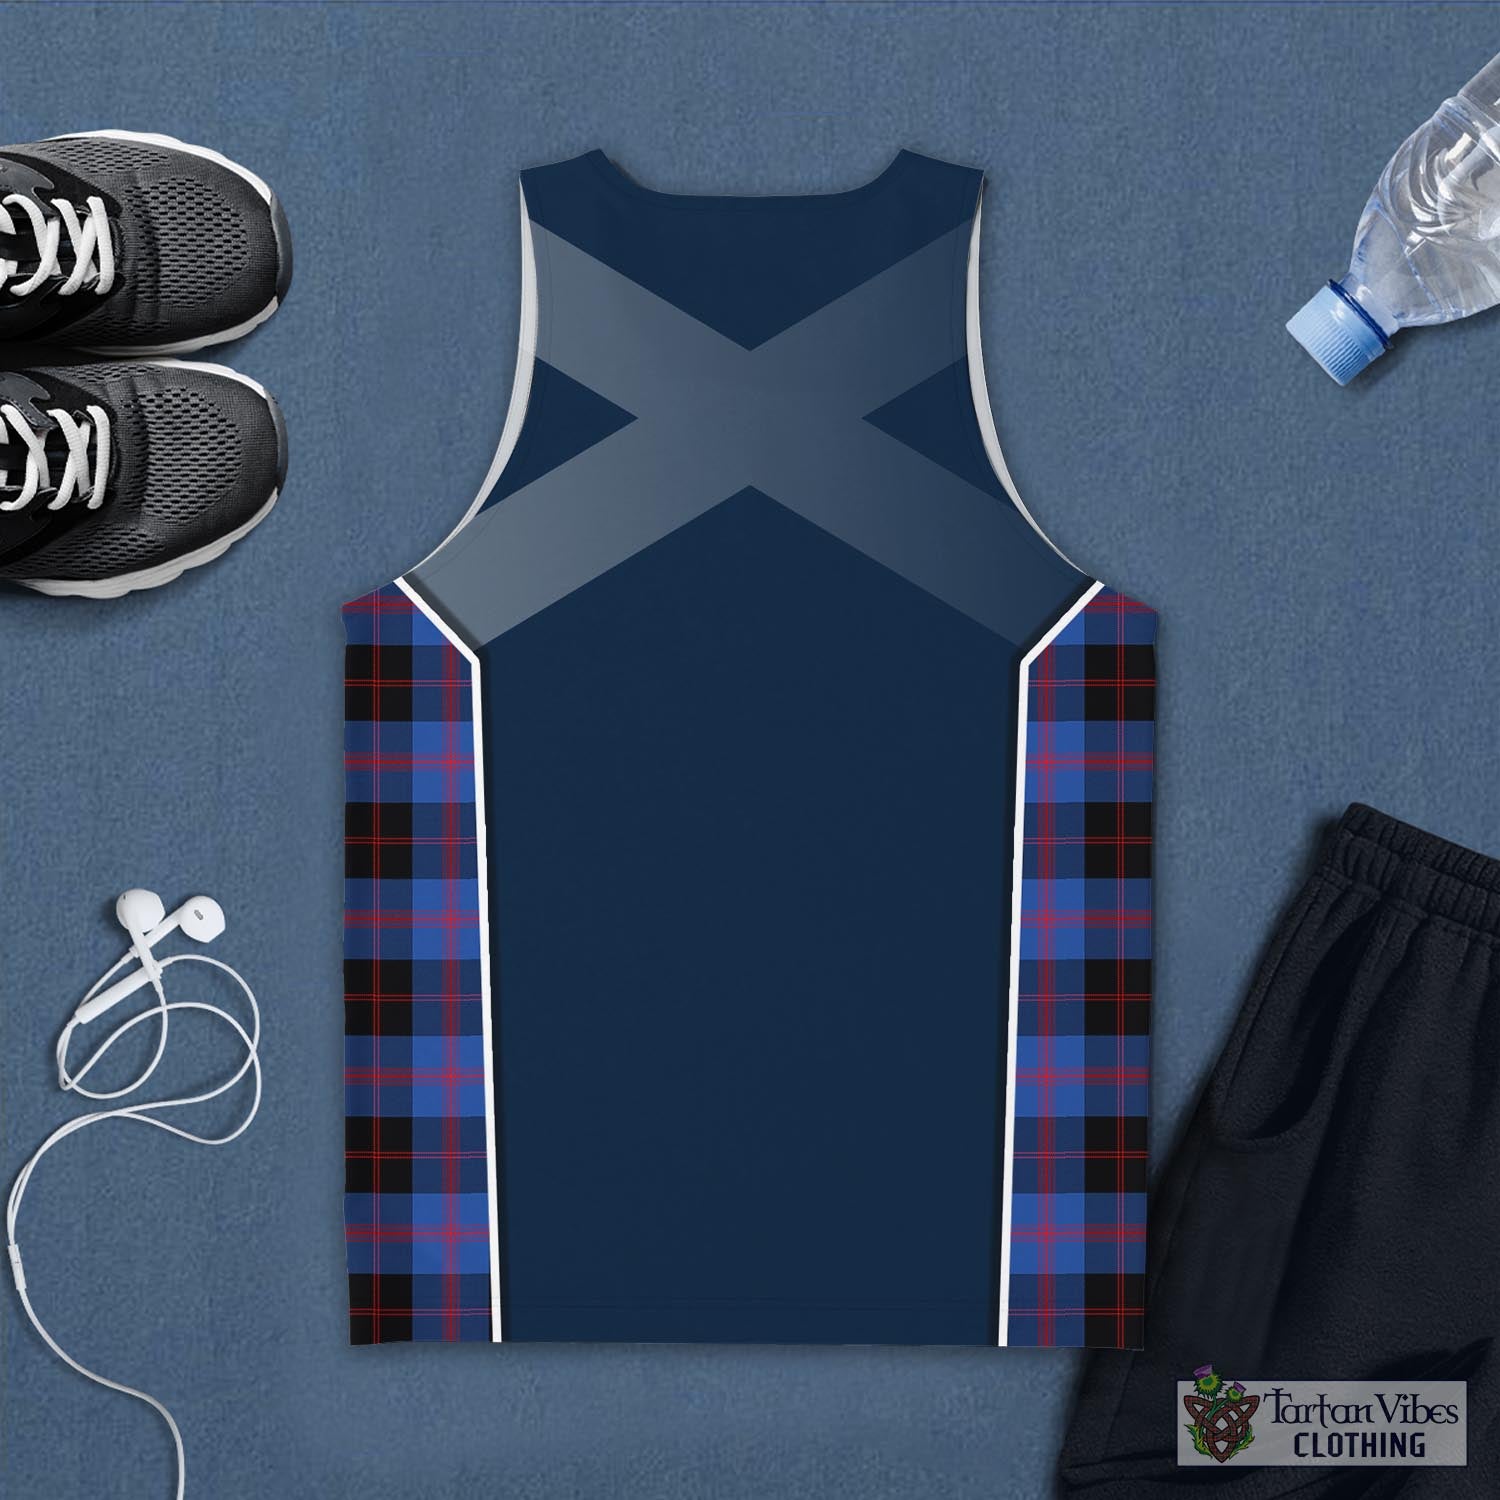 Tartan Vibes Clothing Maule Tartan Men's Tanks Top with Family Crest and Scottish Thistle Vibes Sport Style